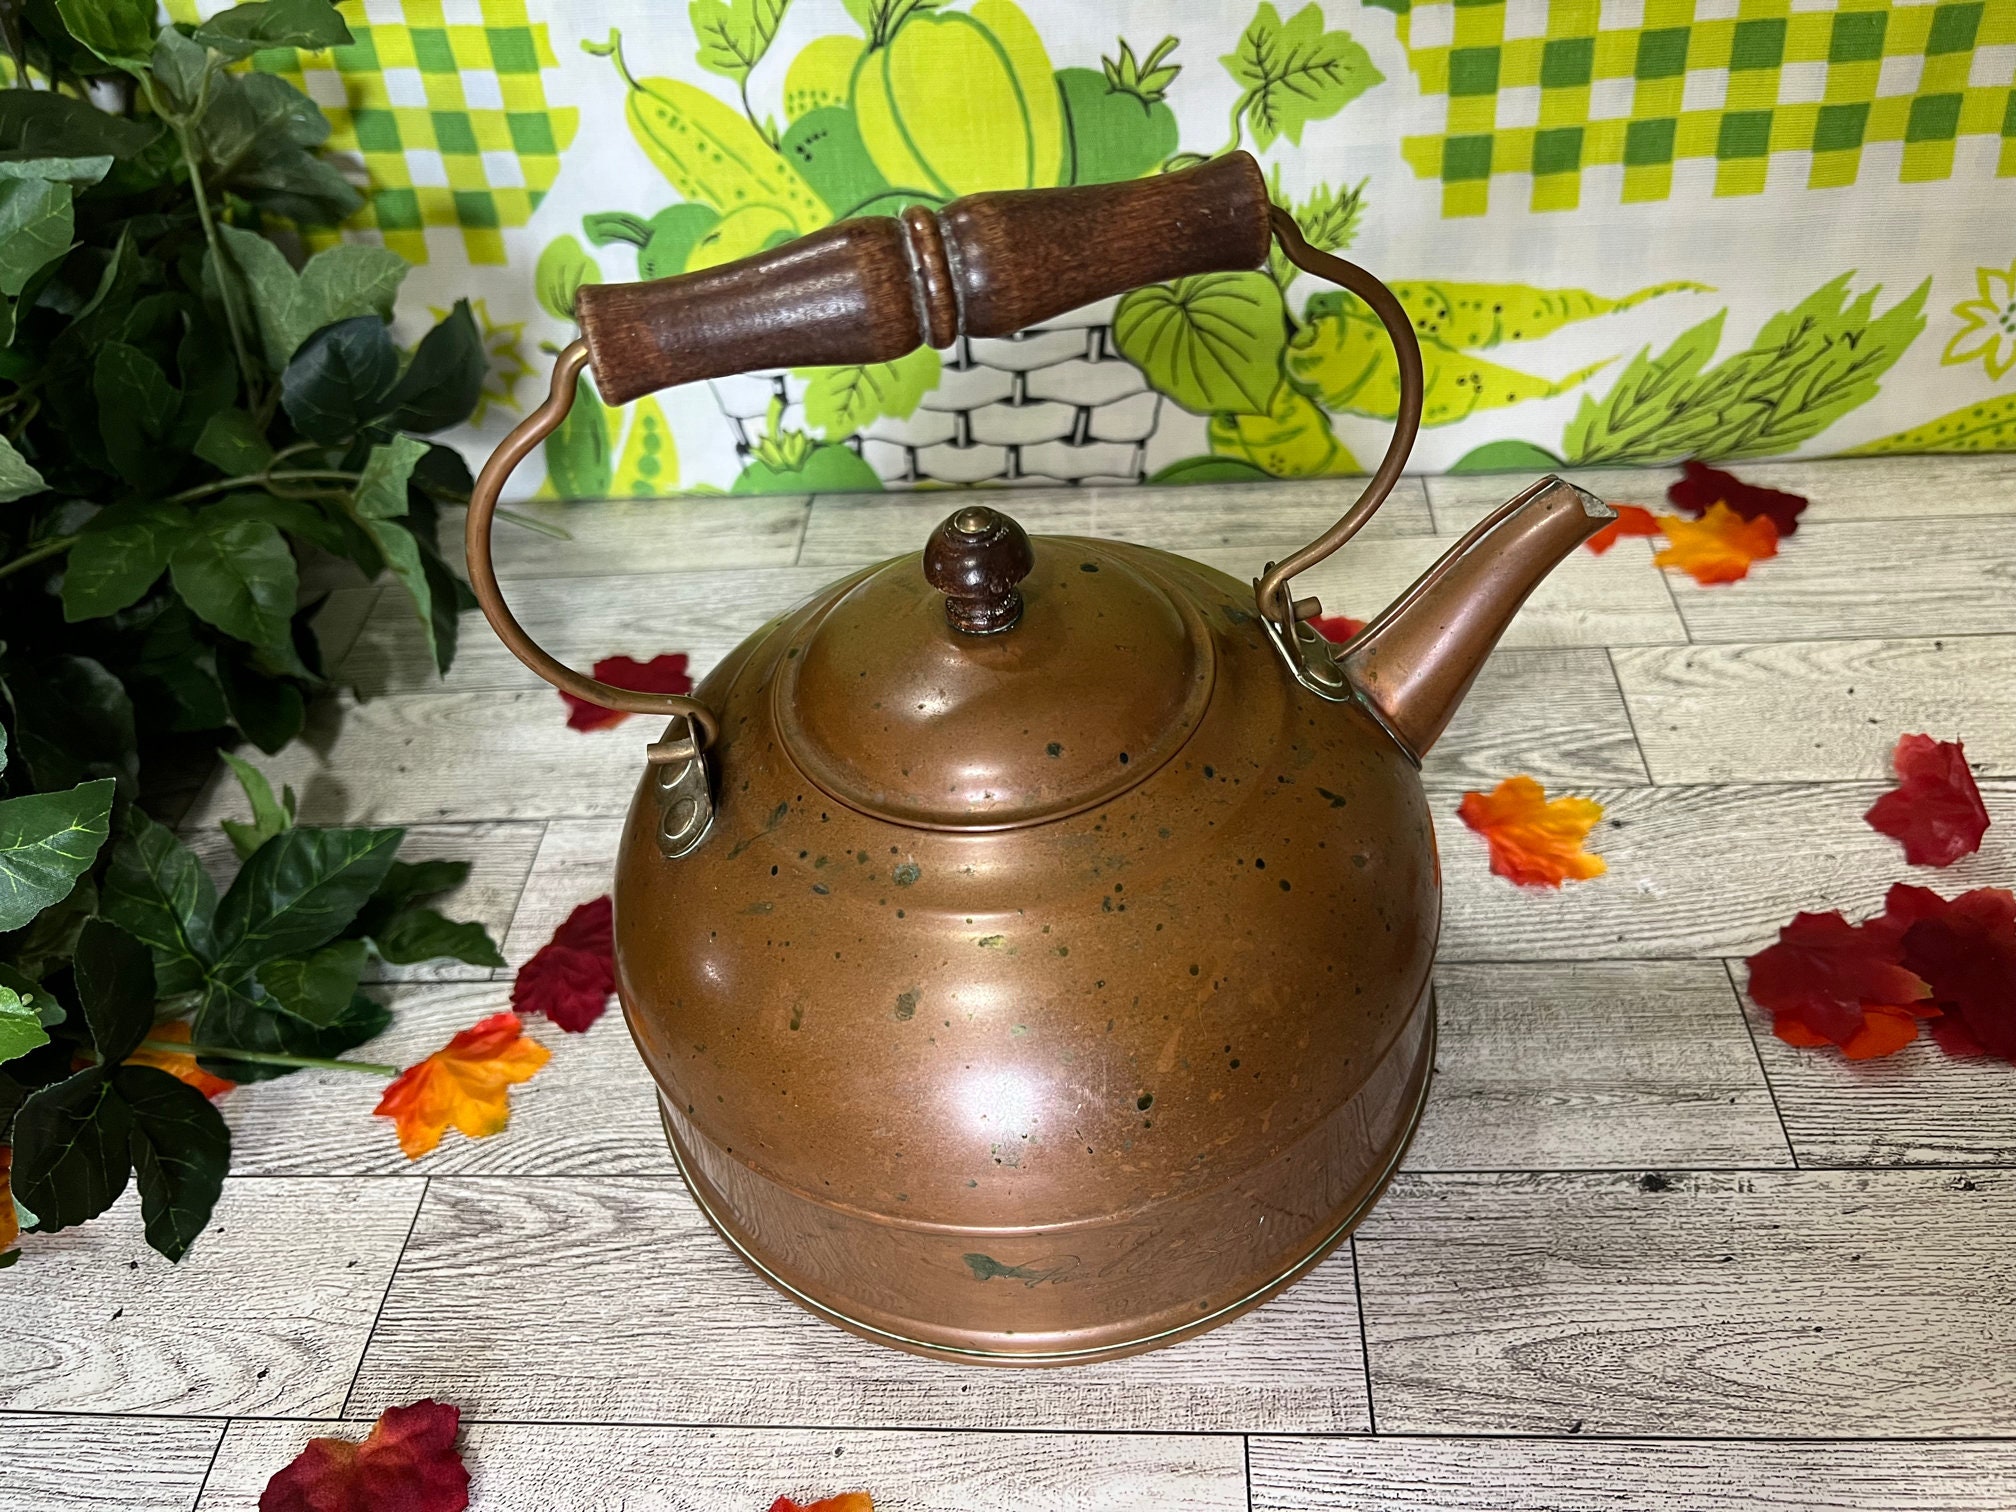 2 1/3 Qt Revere Ware Copper Red Aluminum Whistling Tea Kettle Made in Rome,  NY Vintage Revere Red Kettle More Revere in 19thrifty Shop 